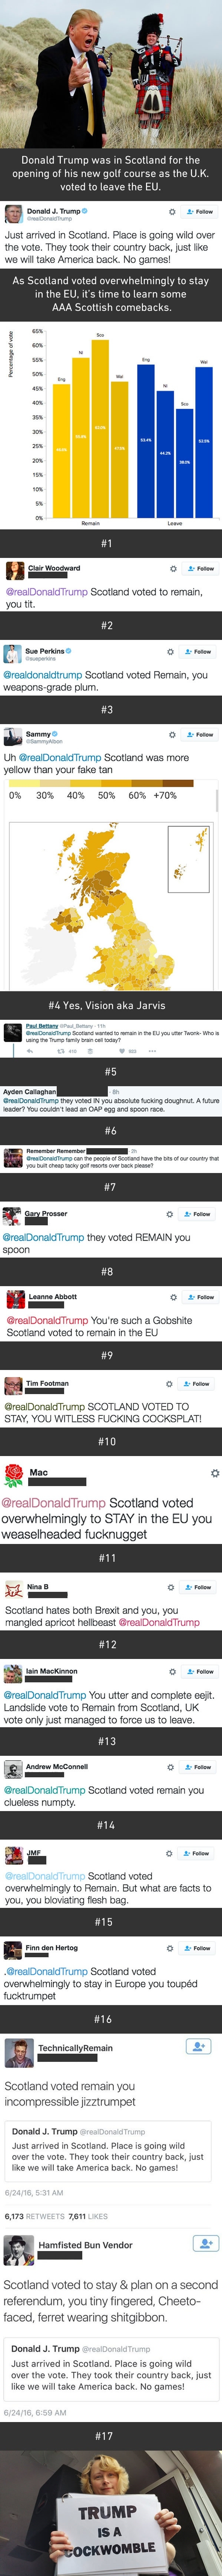 Scots shower Trump with glorious Scottish insults after his Brexit tweet